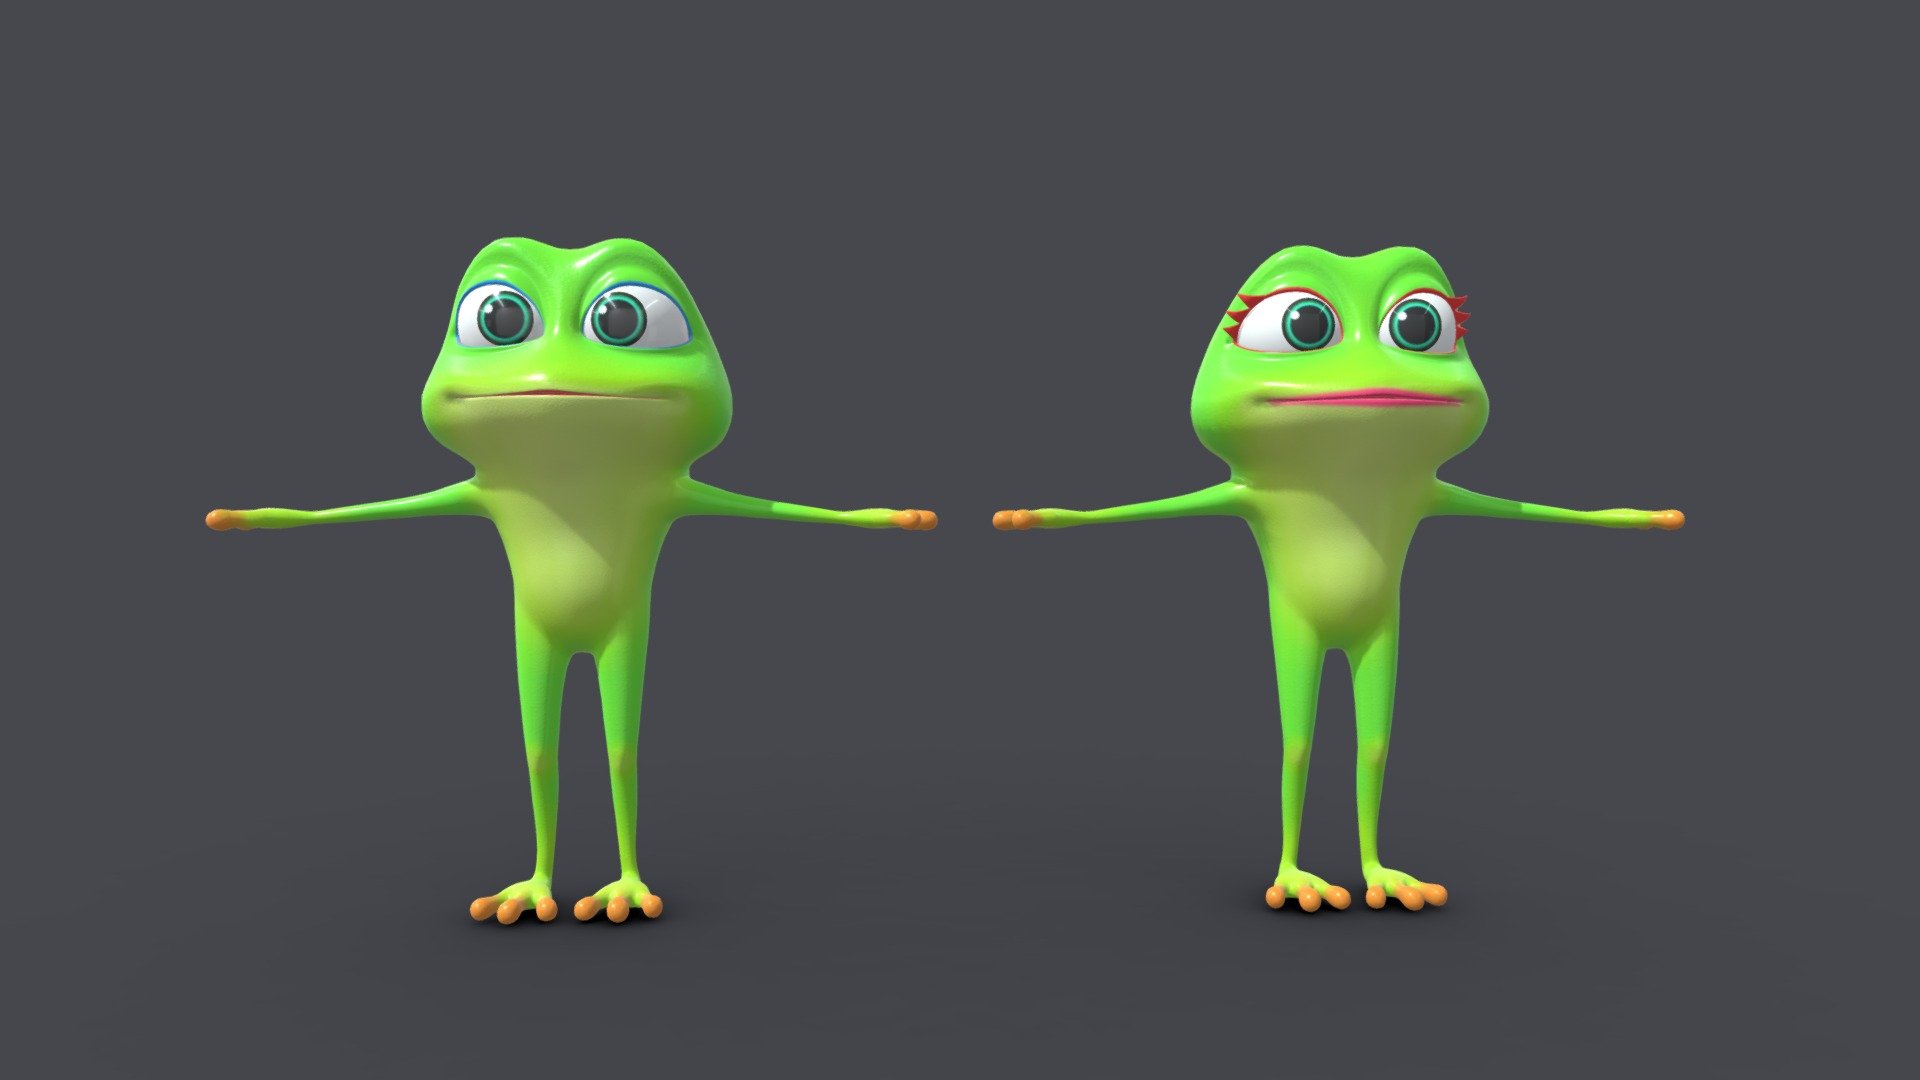 Preview Rig: 

https://youtu.be/4k0fjM3aR3c

https://youtu.be/4k0fjM3aR3c

3D Models Frog - Hight poly Frog

Male Polys: 32192. Verts: 16165.

Textures: 02 textures 2048 x 2048,

3Ds max file : no rig.

Softimage : no rig.

Maya : have rig.

Model animal animals we designed to be suitable for animation.

Female Polys: 32816. Verts: 16507.

Textures: 02 textures 2048 x 2048,

3Ds max file : no rig.

Softimage : no rig.

Maya : have rig.

Model animal animals we designed to be suitable for animation.

Thank for watching ! - Asset Cartoons - Character - Animals - Frog Rig - Buy Royalty Free 3D model by InCom Studio (@incomstudio) 3d model